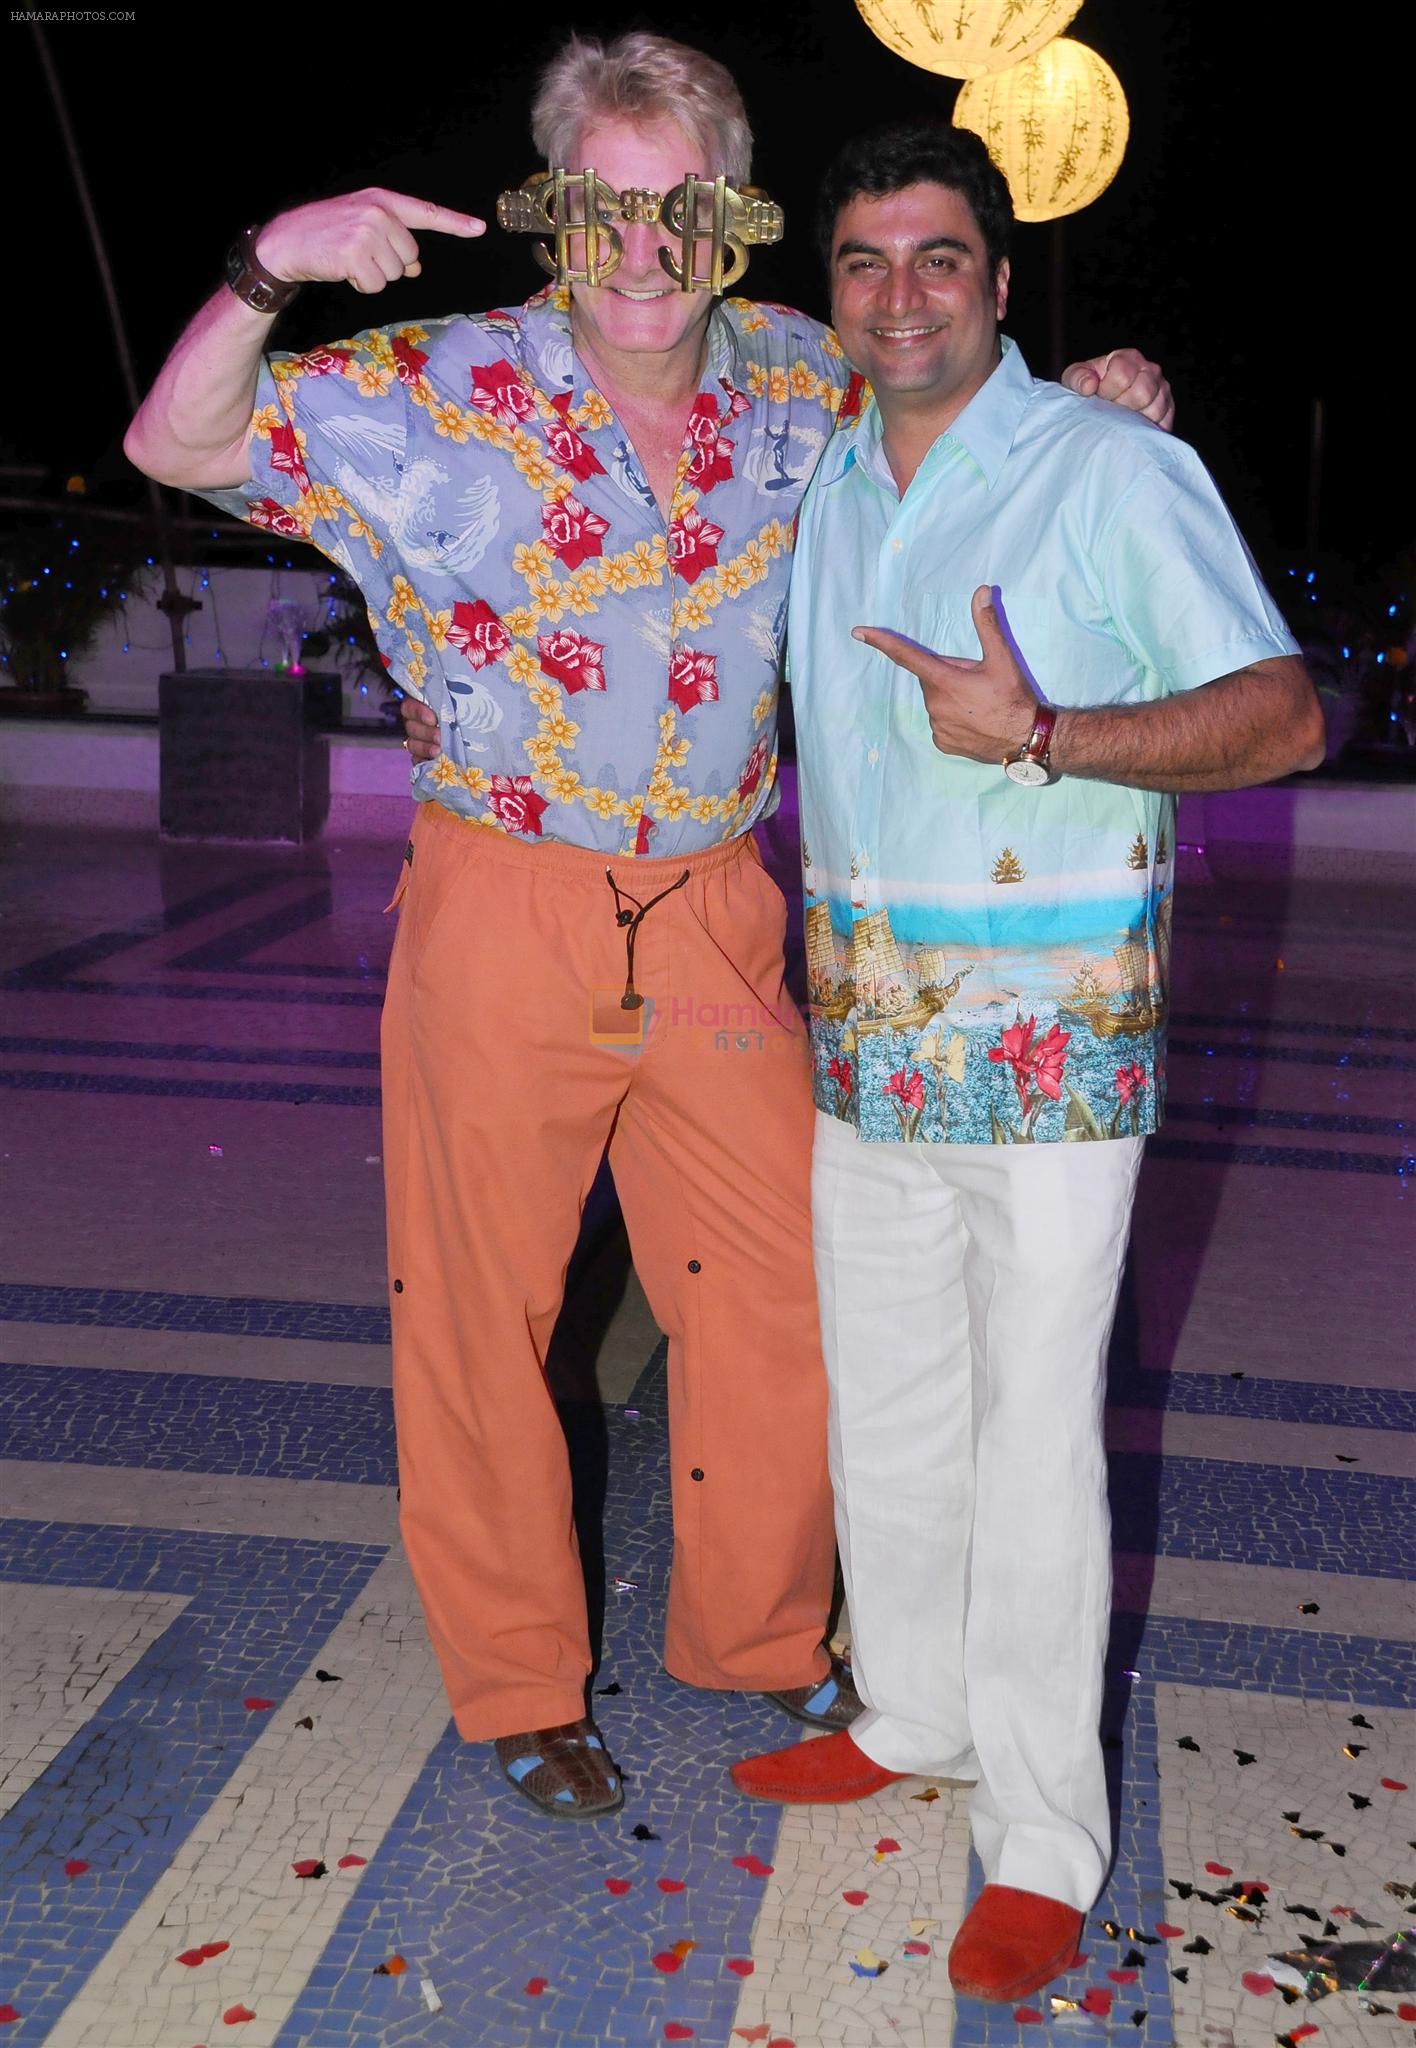 Gary Richardson with Farzad Billimoria at Naughty at forty Hawain surprise birthday party by Amy Billimoria on 12th March 2012